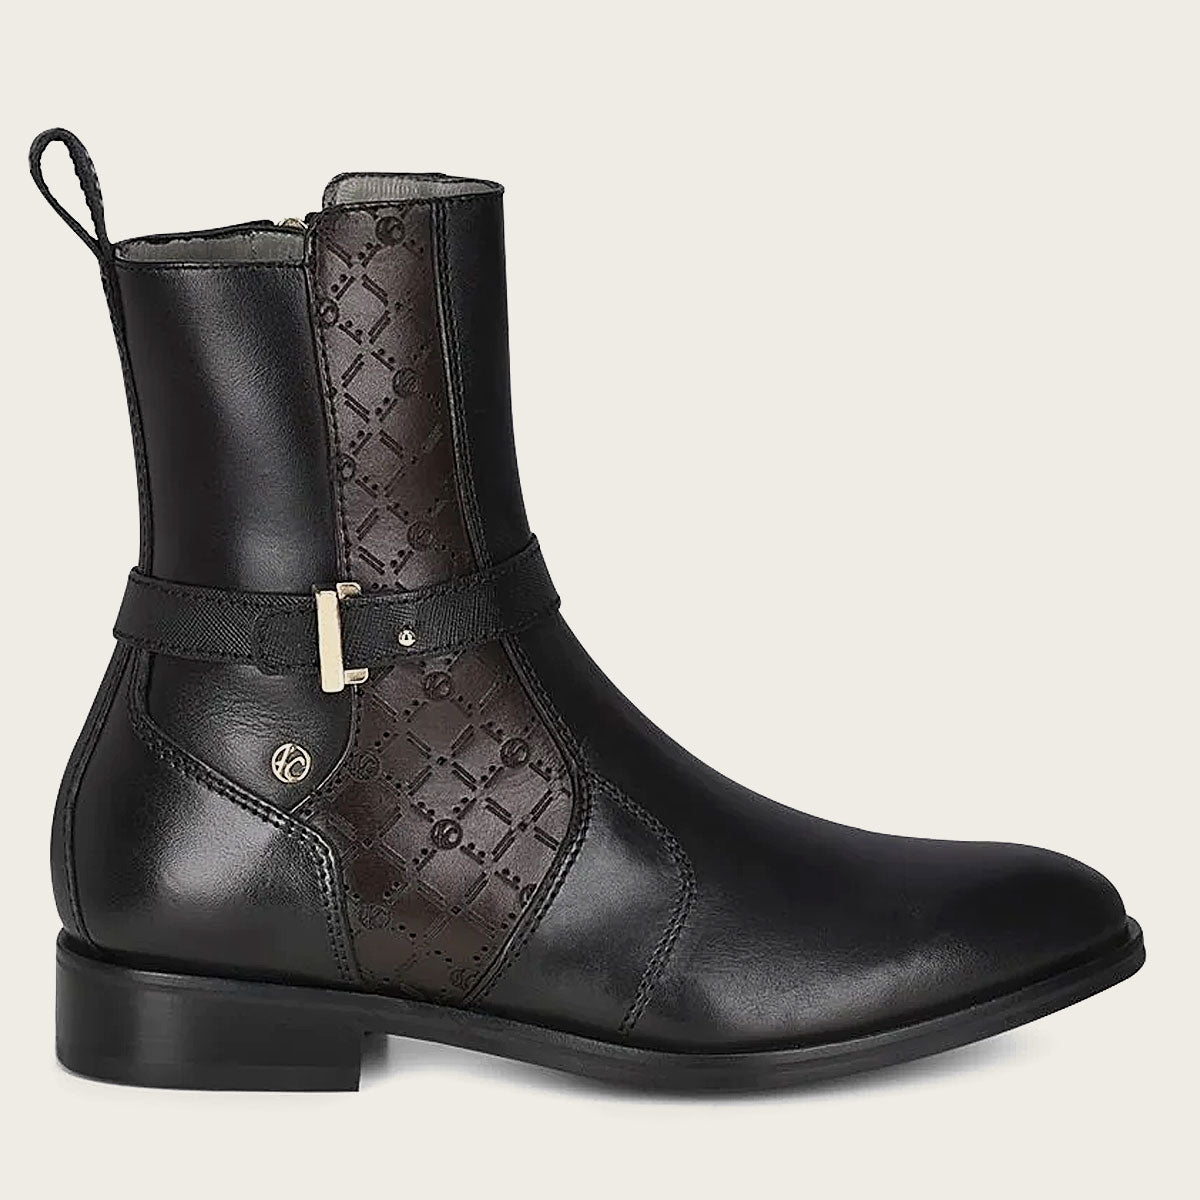 Hand-painted black leather engraved bootie. Unique and stylish. Shop now for a bold addition to your footwear collection